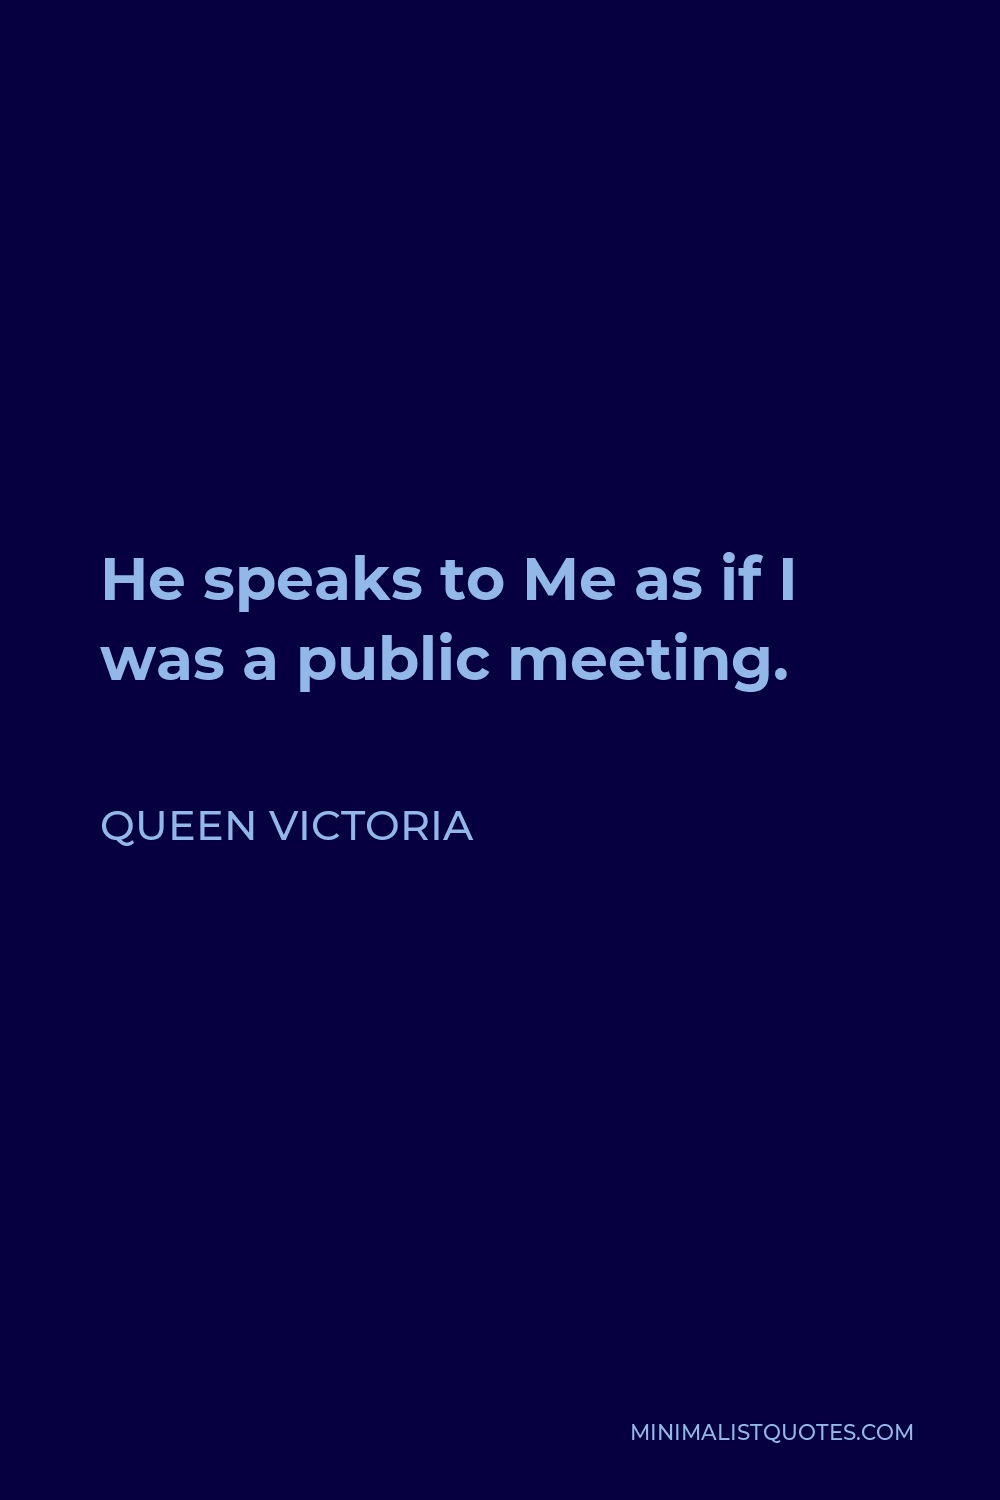 Queen Victoria Quote - He speaks to Me as if I was a public meeting.